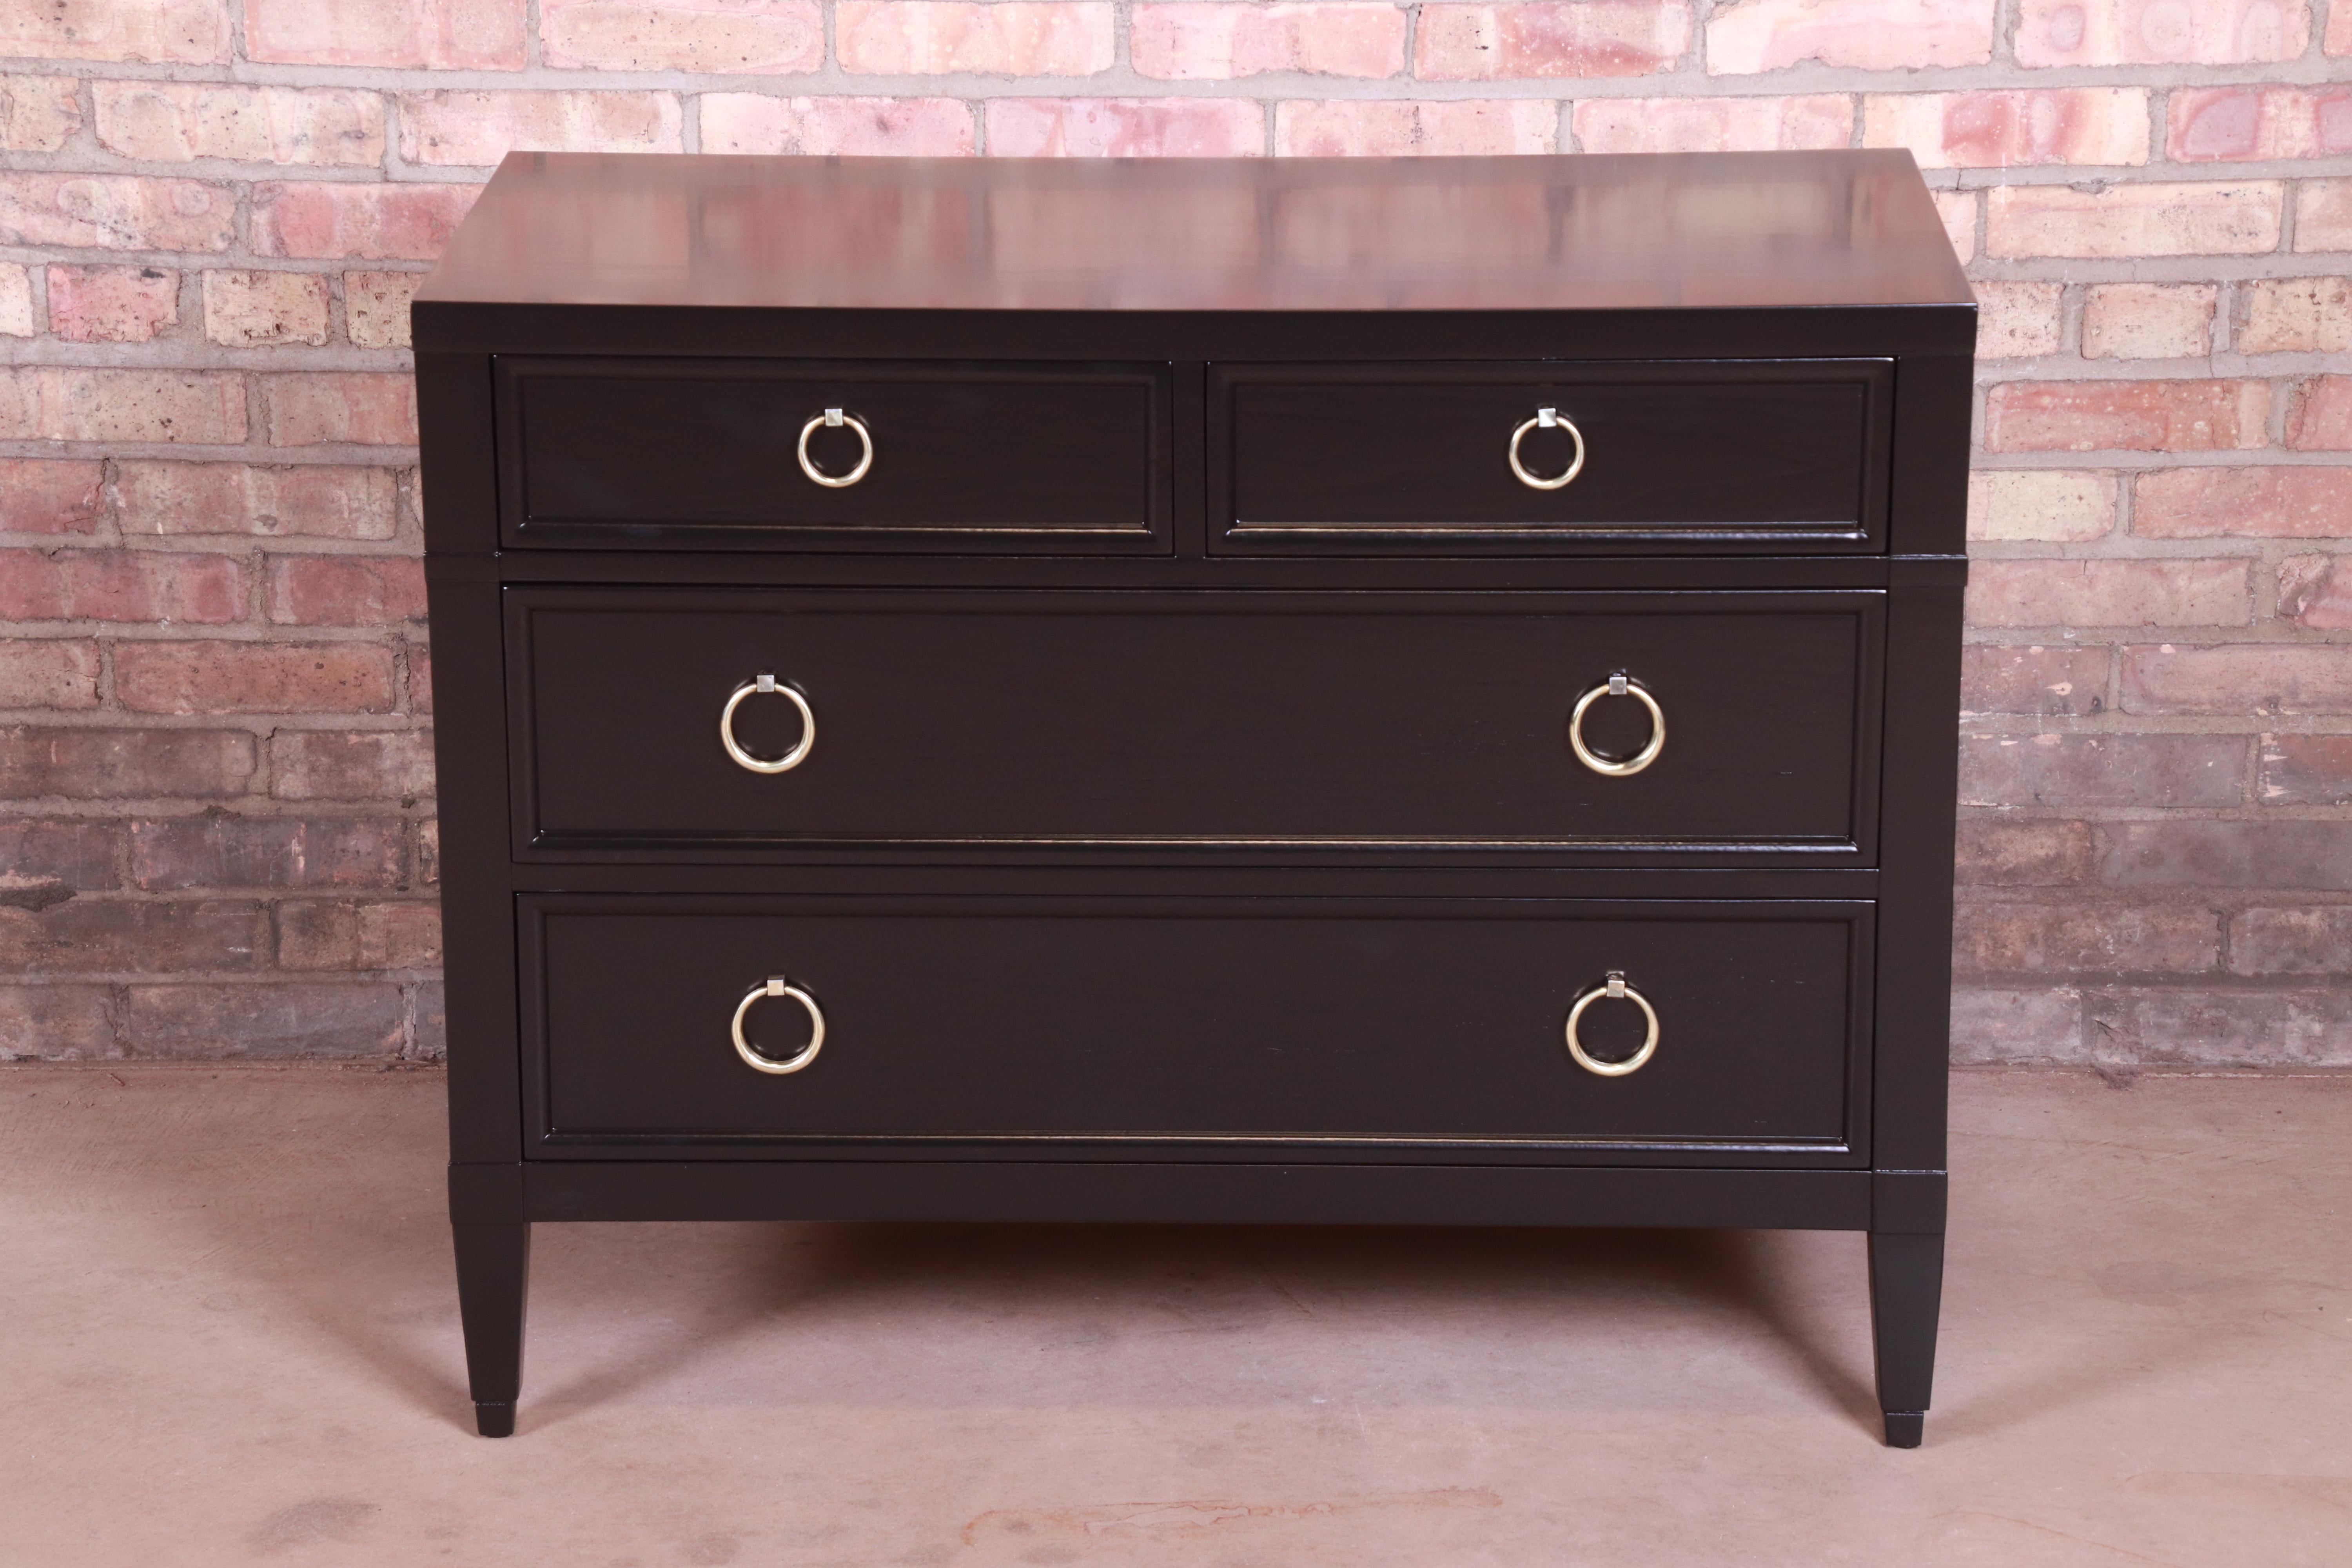 An exceptional midcentury French Regency style dresser chest or commode

By Baker Furniture 